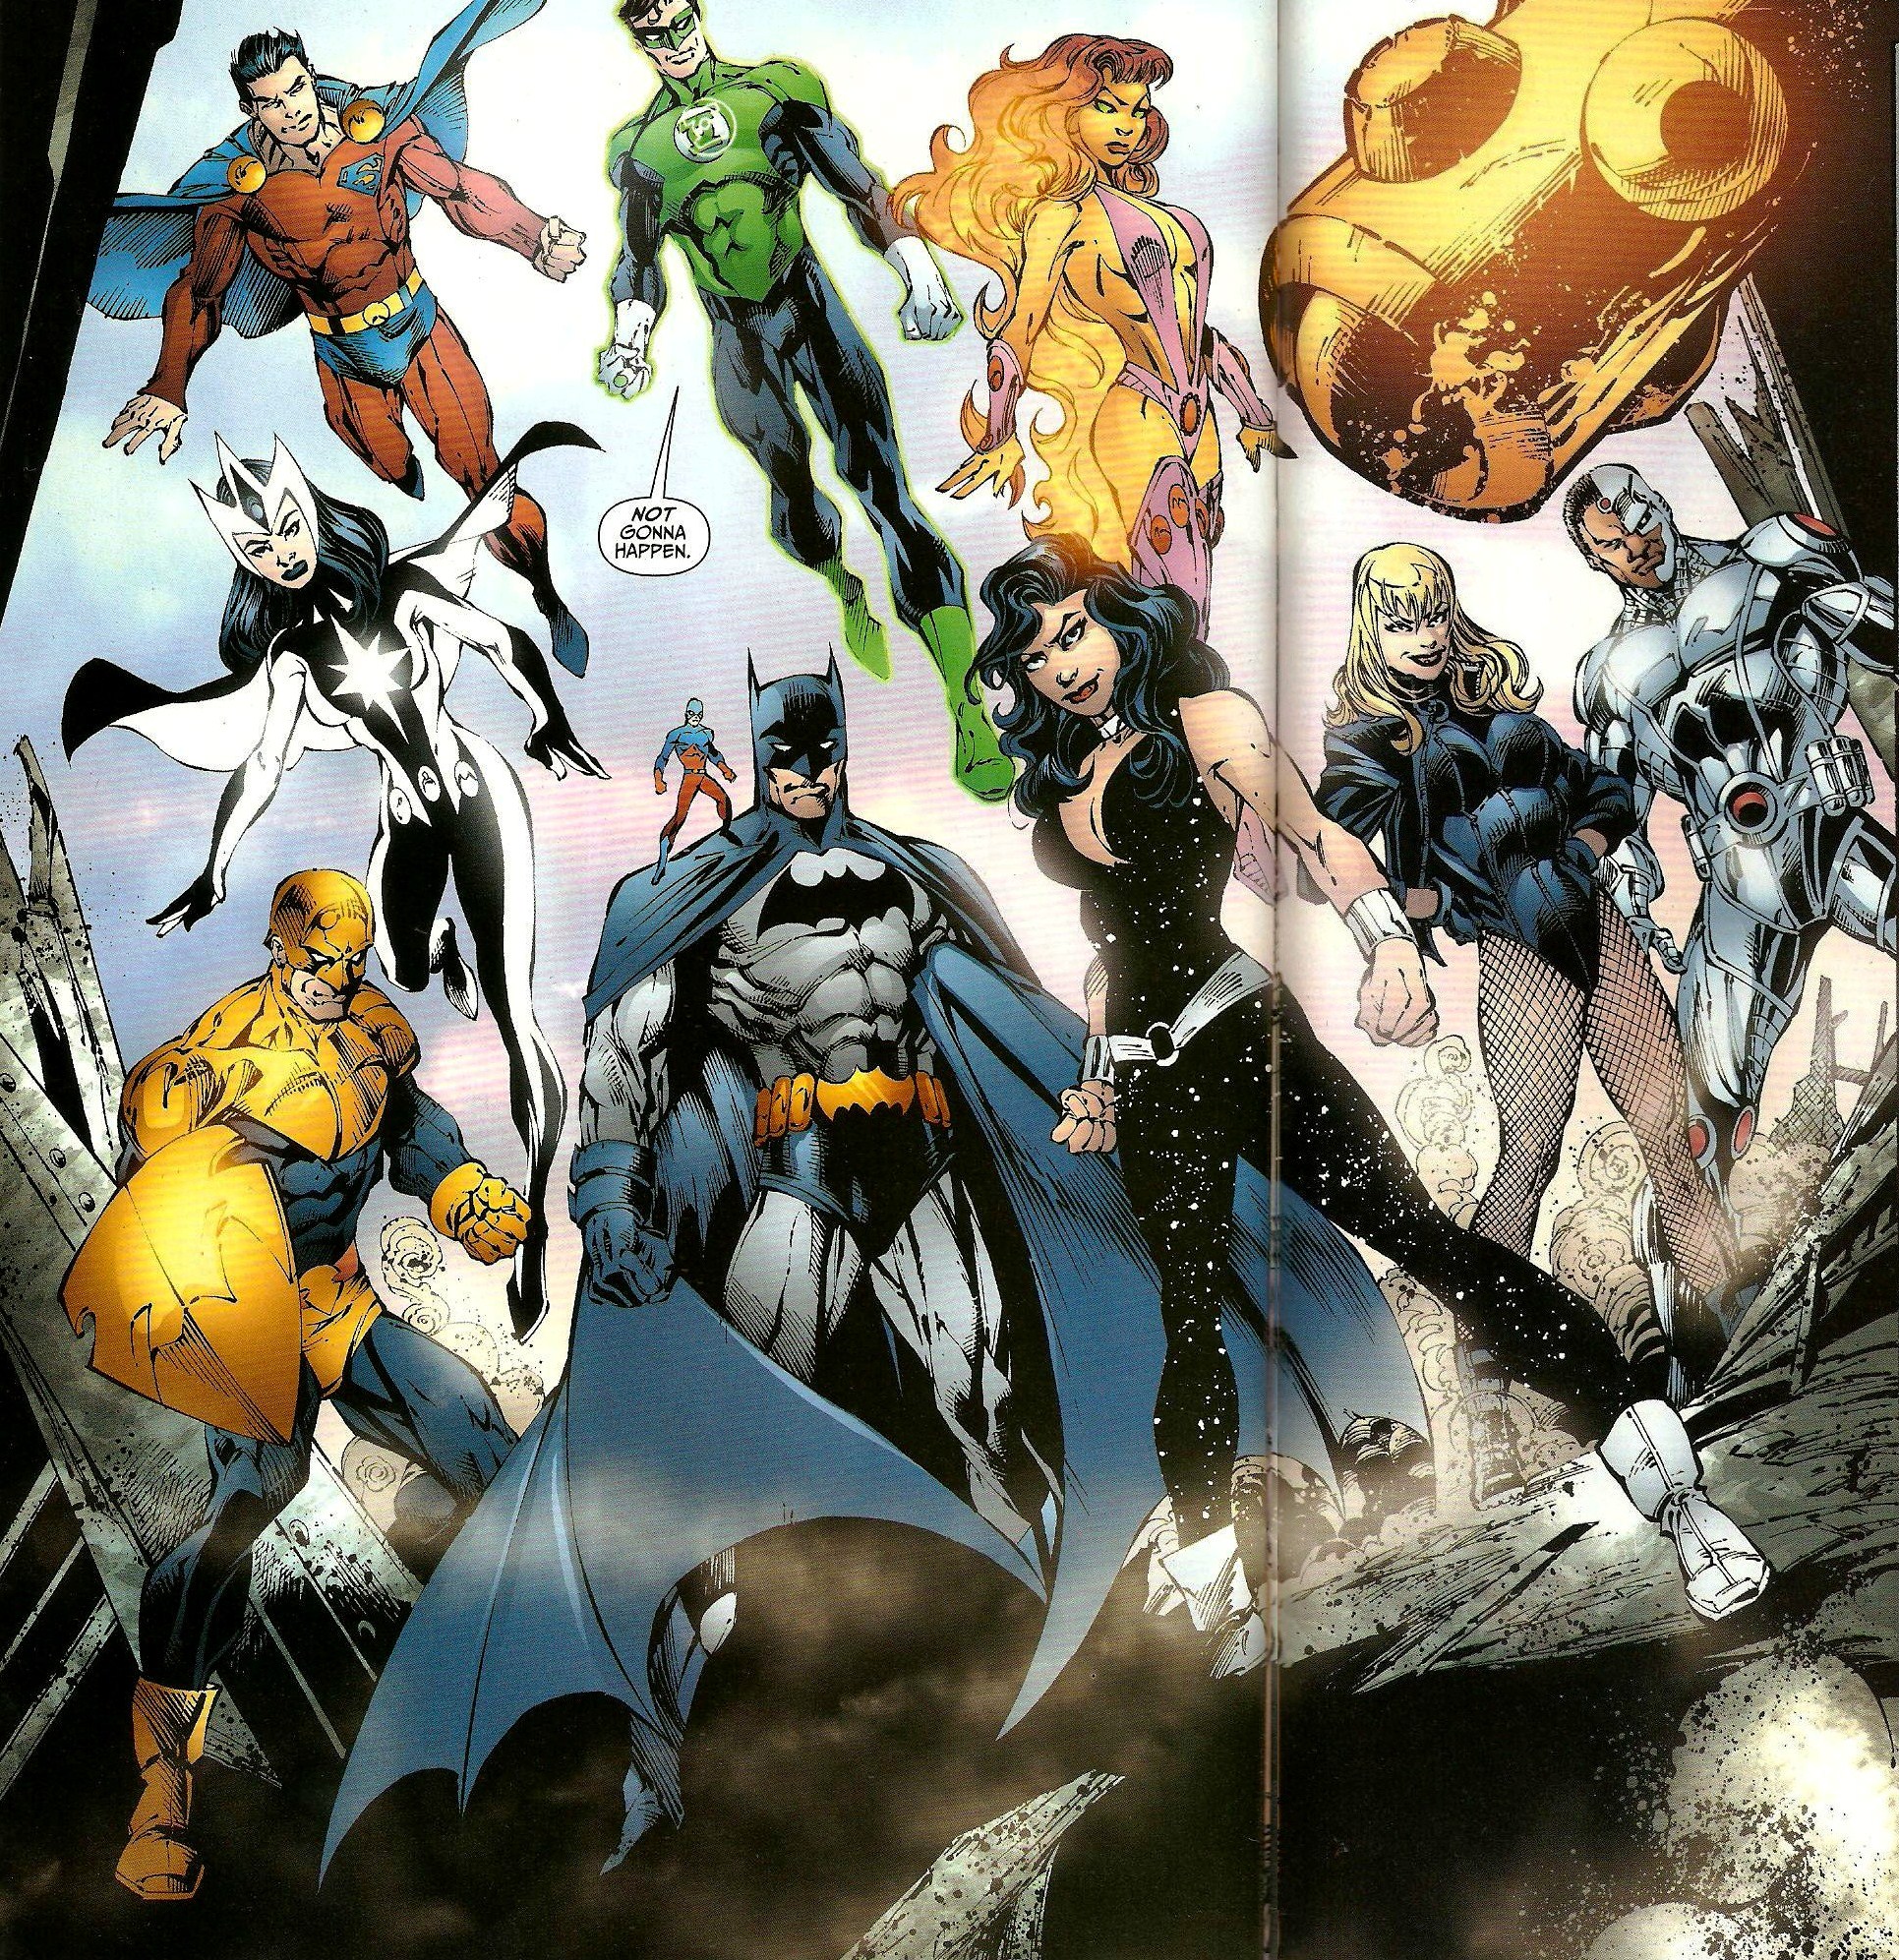 From Justice League of America (Vol. 2) #42 (2010)